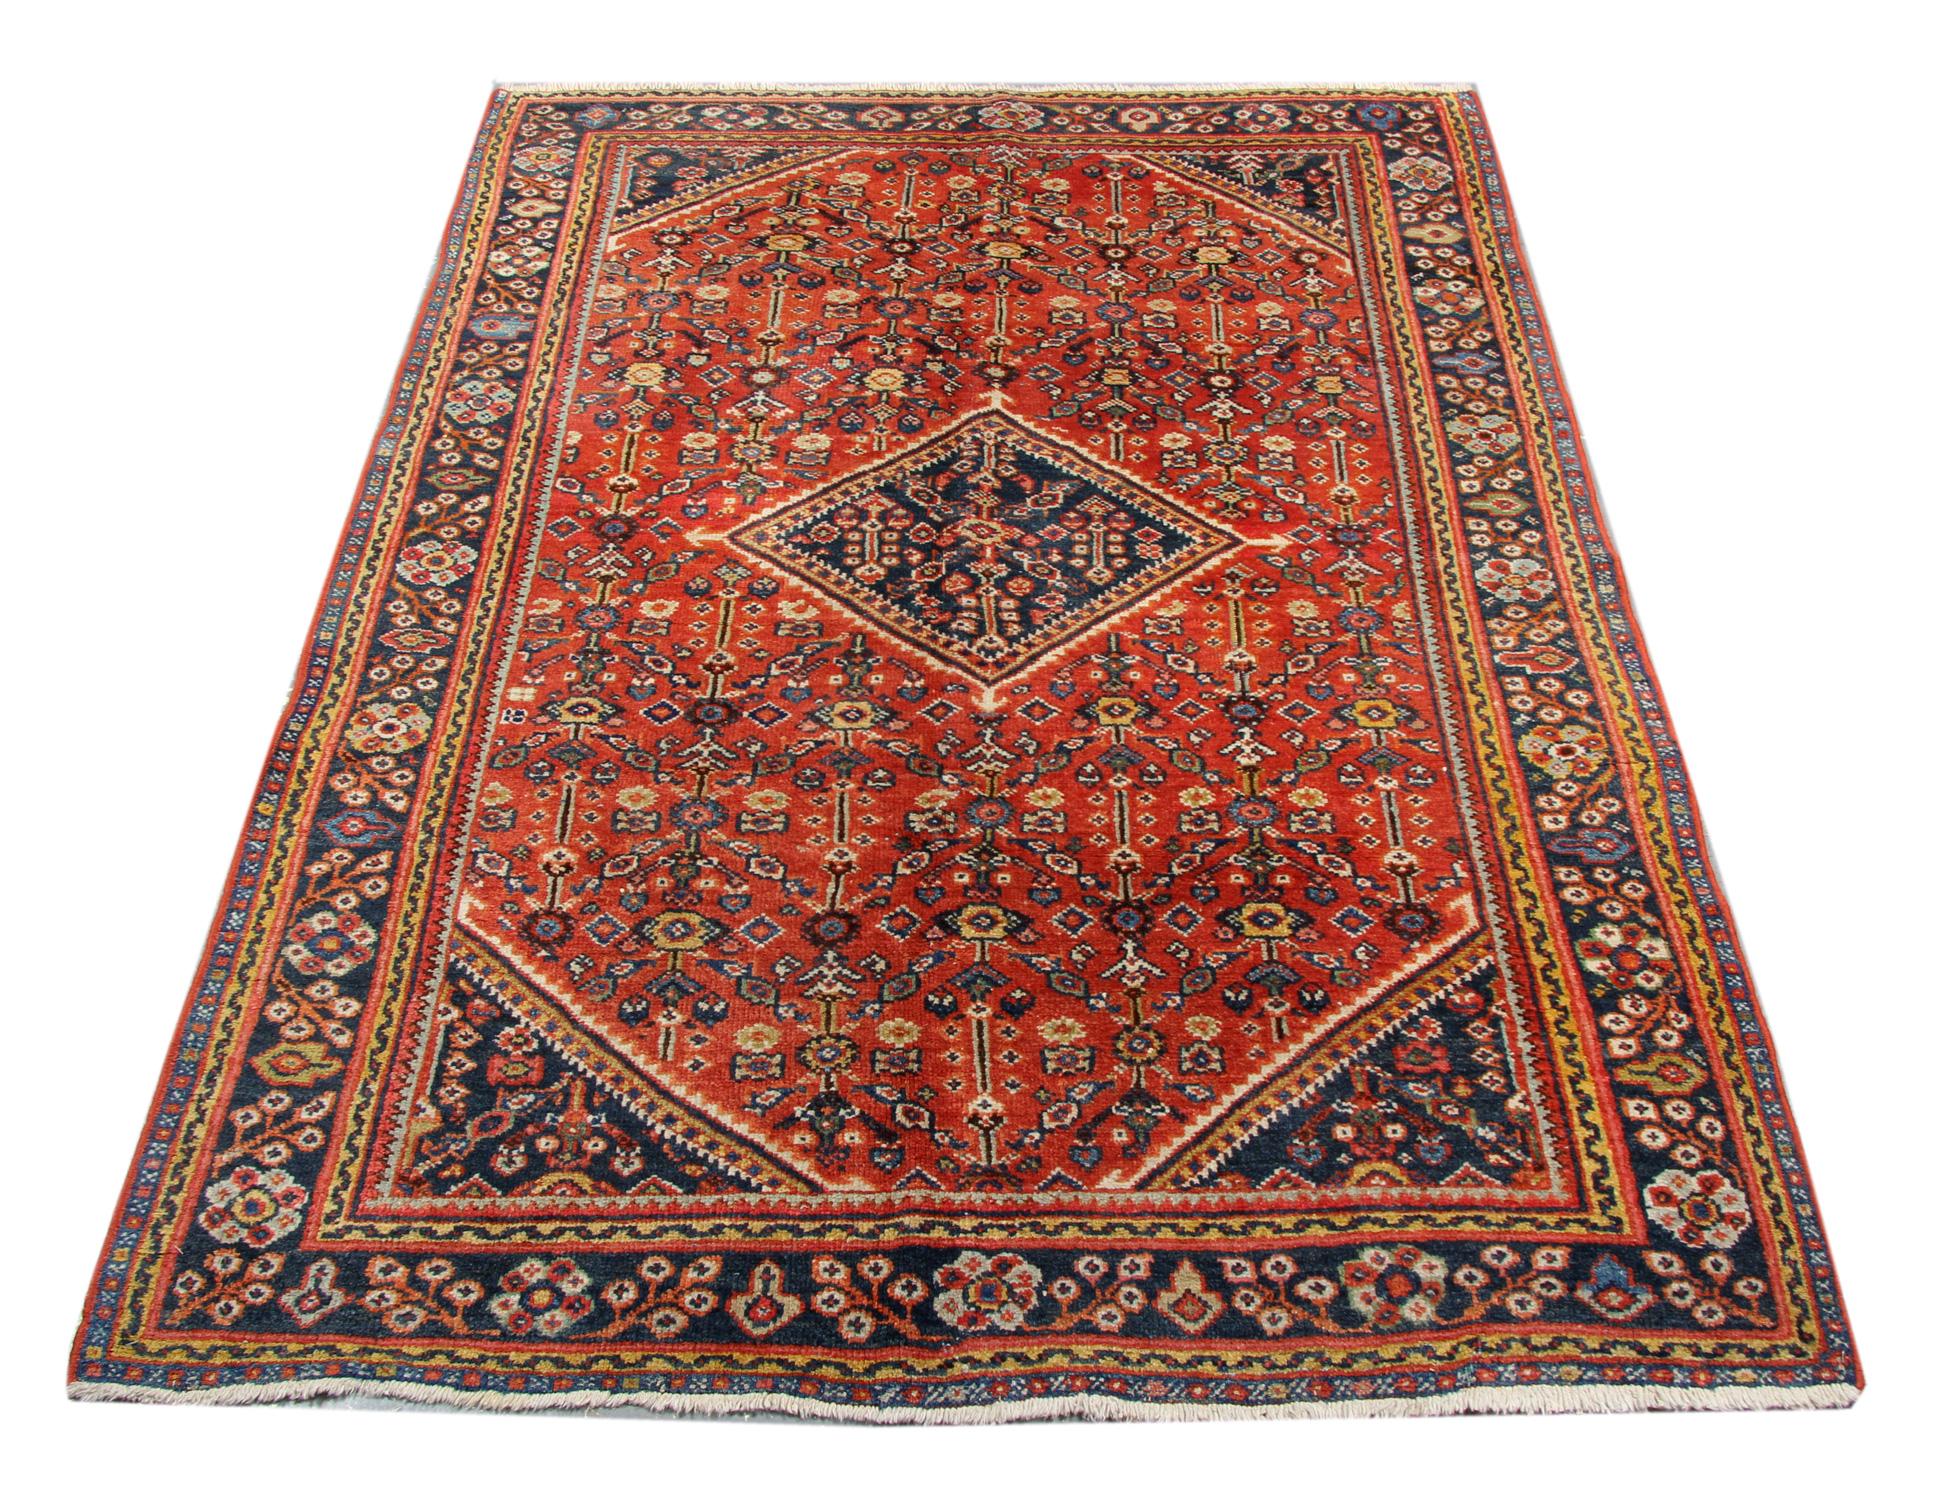 This fine wool Caucasian rug is an excellent example of geometric rugs woven in the early 20th century, circa 1900. The design is geometric, featuring a beautiful central medallion and symmetrical surrounding design with blue, beige and yellow